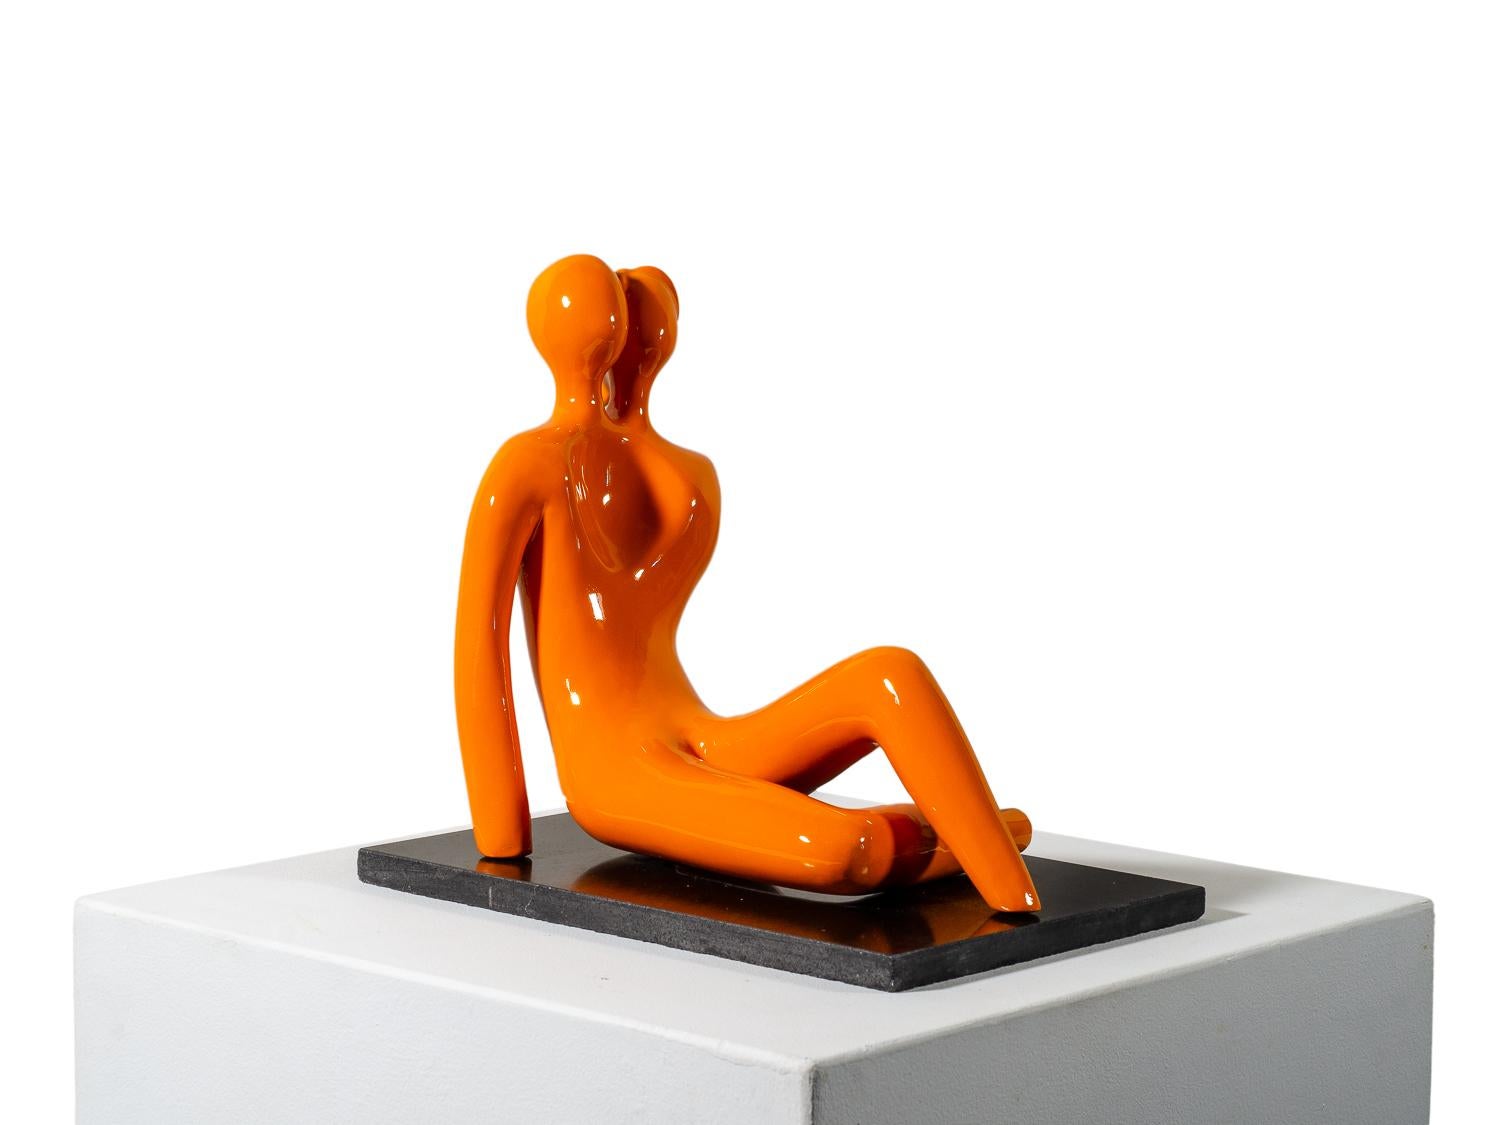 Beatriz Gerenstein Figurative Sculpture - Soul Mates #2 (in orange) When in love their souls and bodies fuse into one.